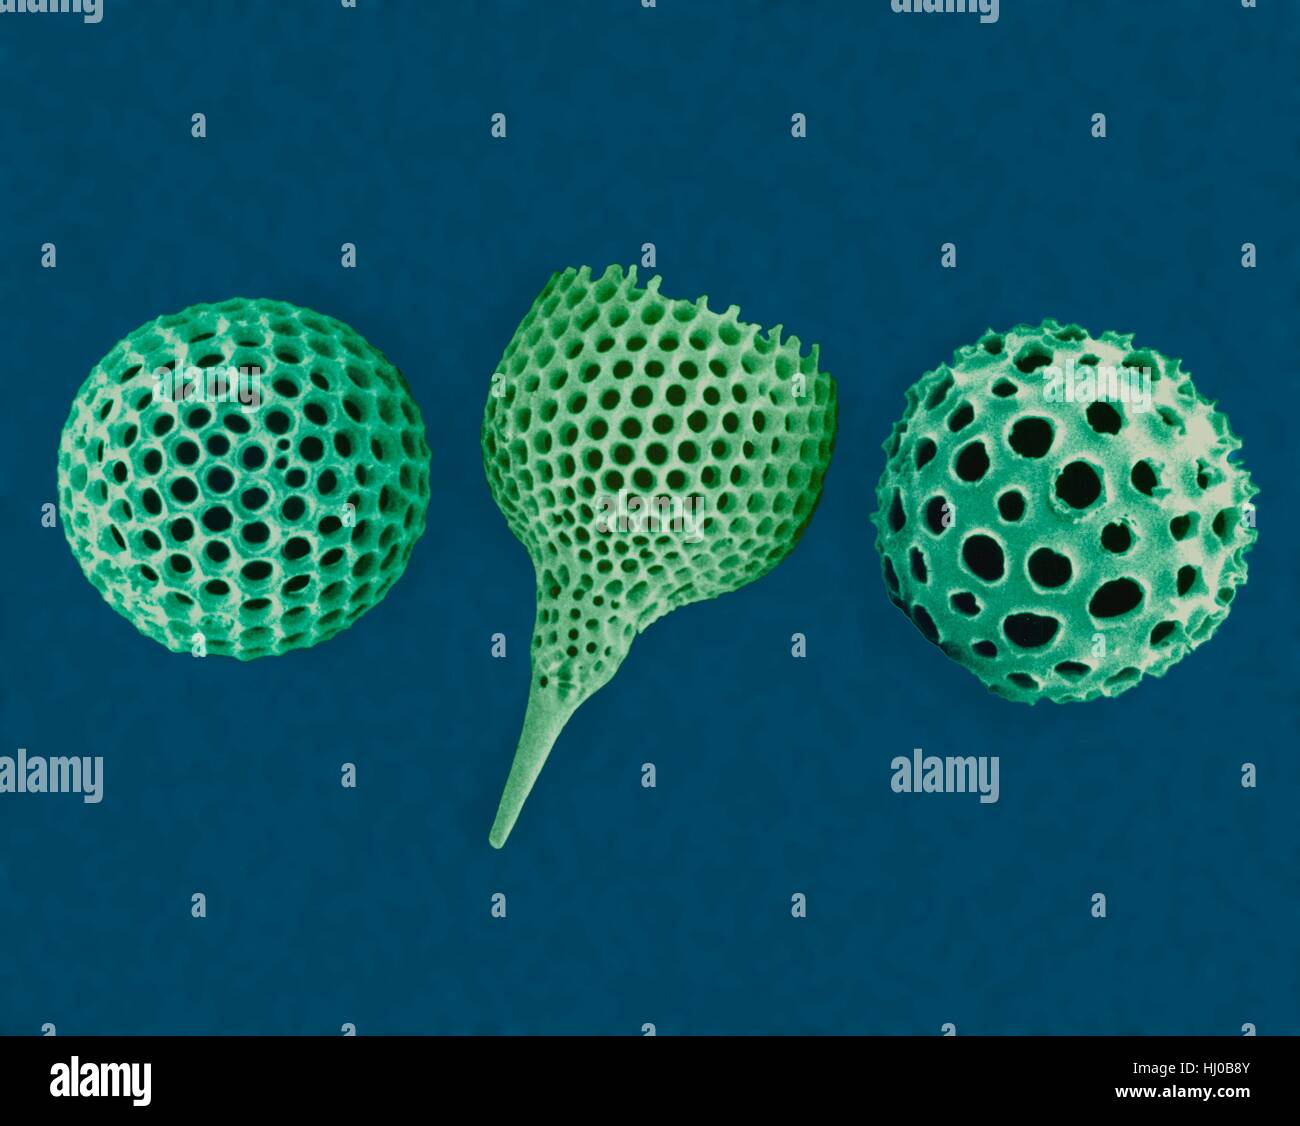 Radiolarian tests (salt water),coloured scanning electron micrograph (SEM).The hard skeletons are composed of silica or strontium sulphate.The Radiolaria (also called Radiozoa) are protozoa that produce intricate mineral skeletons.They are found as zooplankton throughout ocean their skeletal Stock Photo